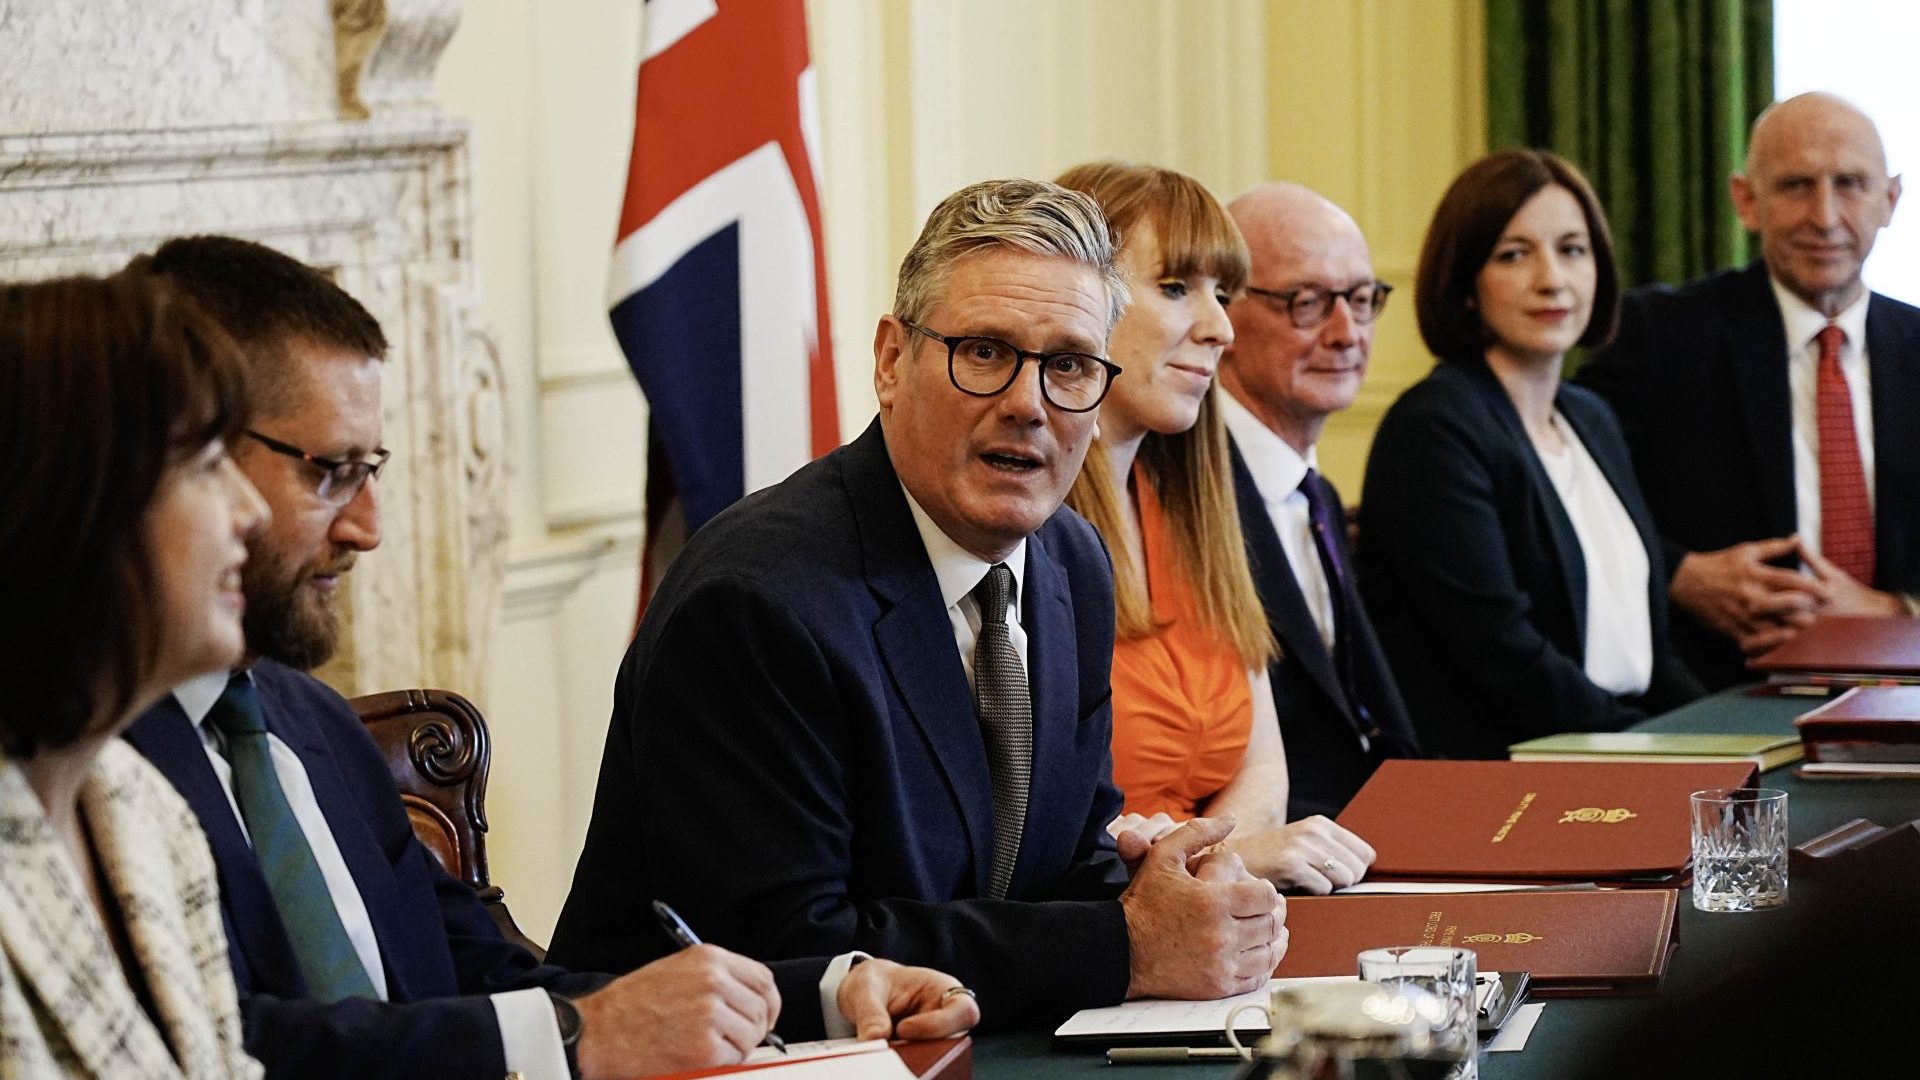 Keir Starmer chairs the first meeting of his cabinet in 10 Downing Street on July 6. Photo: Chris Eades/WPA Pool/Getty